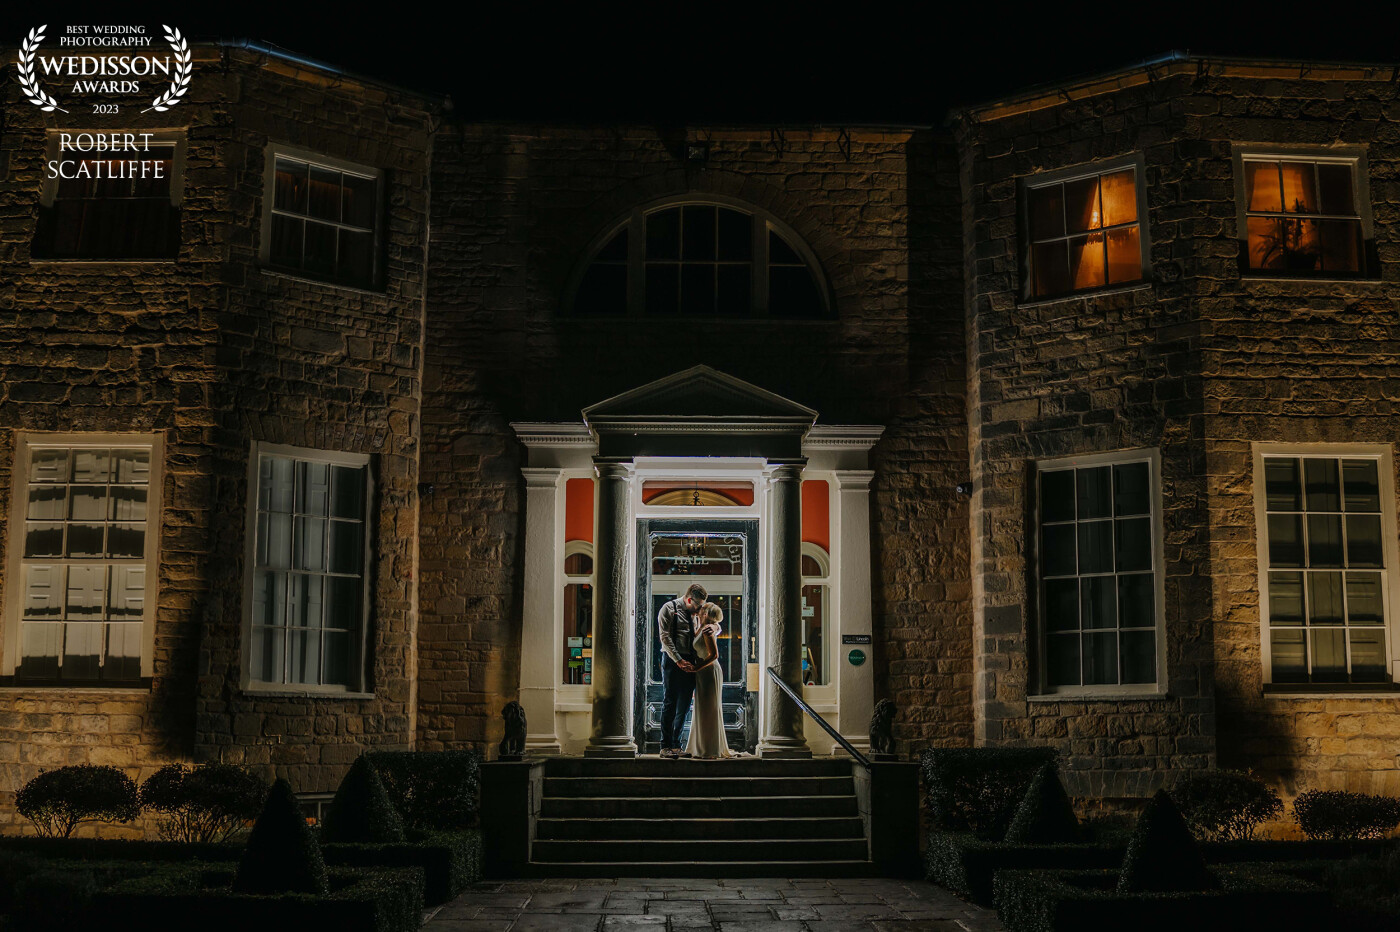 I always like to do a couple of night shots just before I leave if the venue has somewhere to do so & just outside the front door was just perfect for this one.